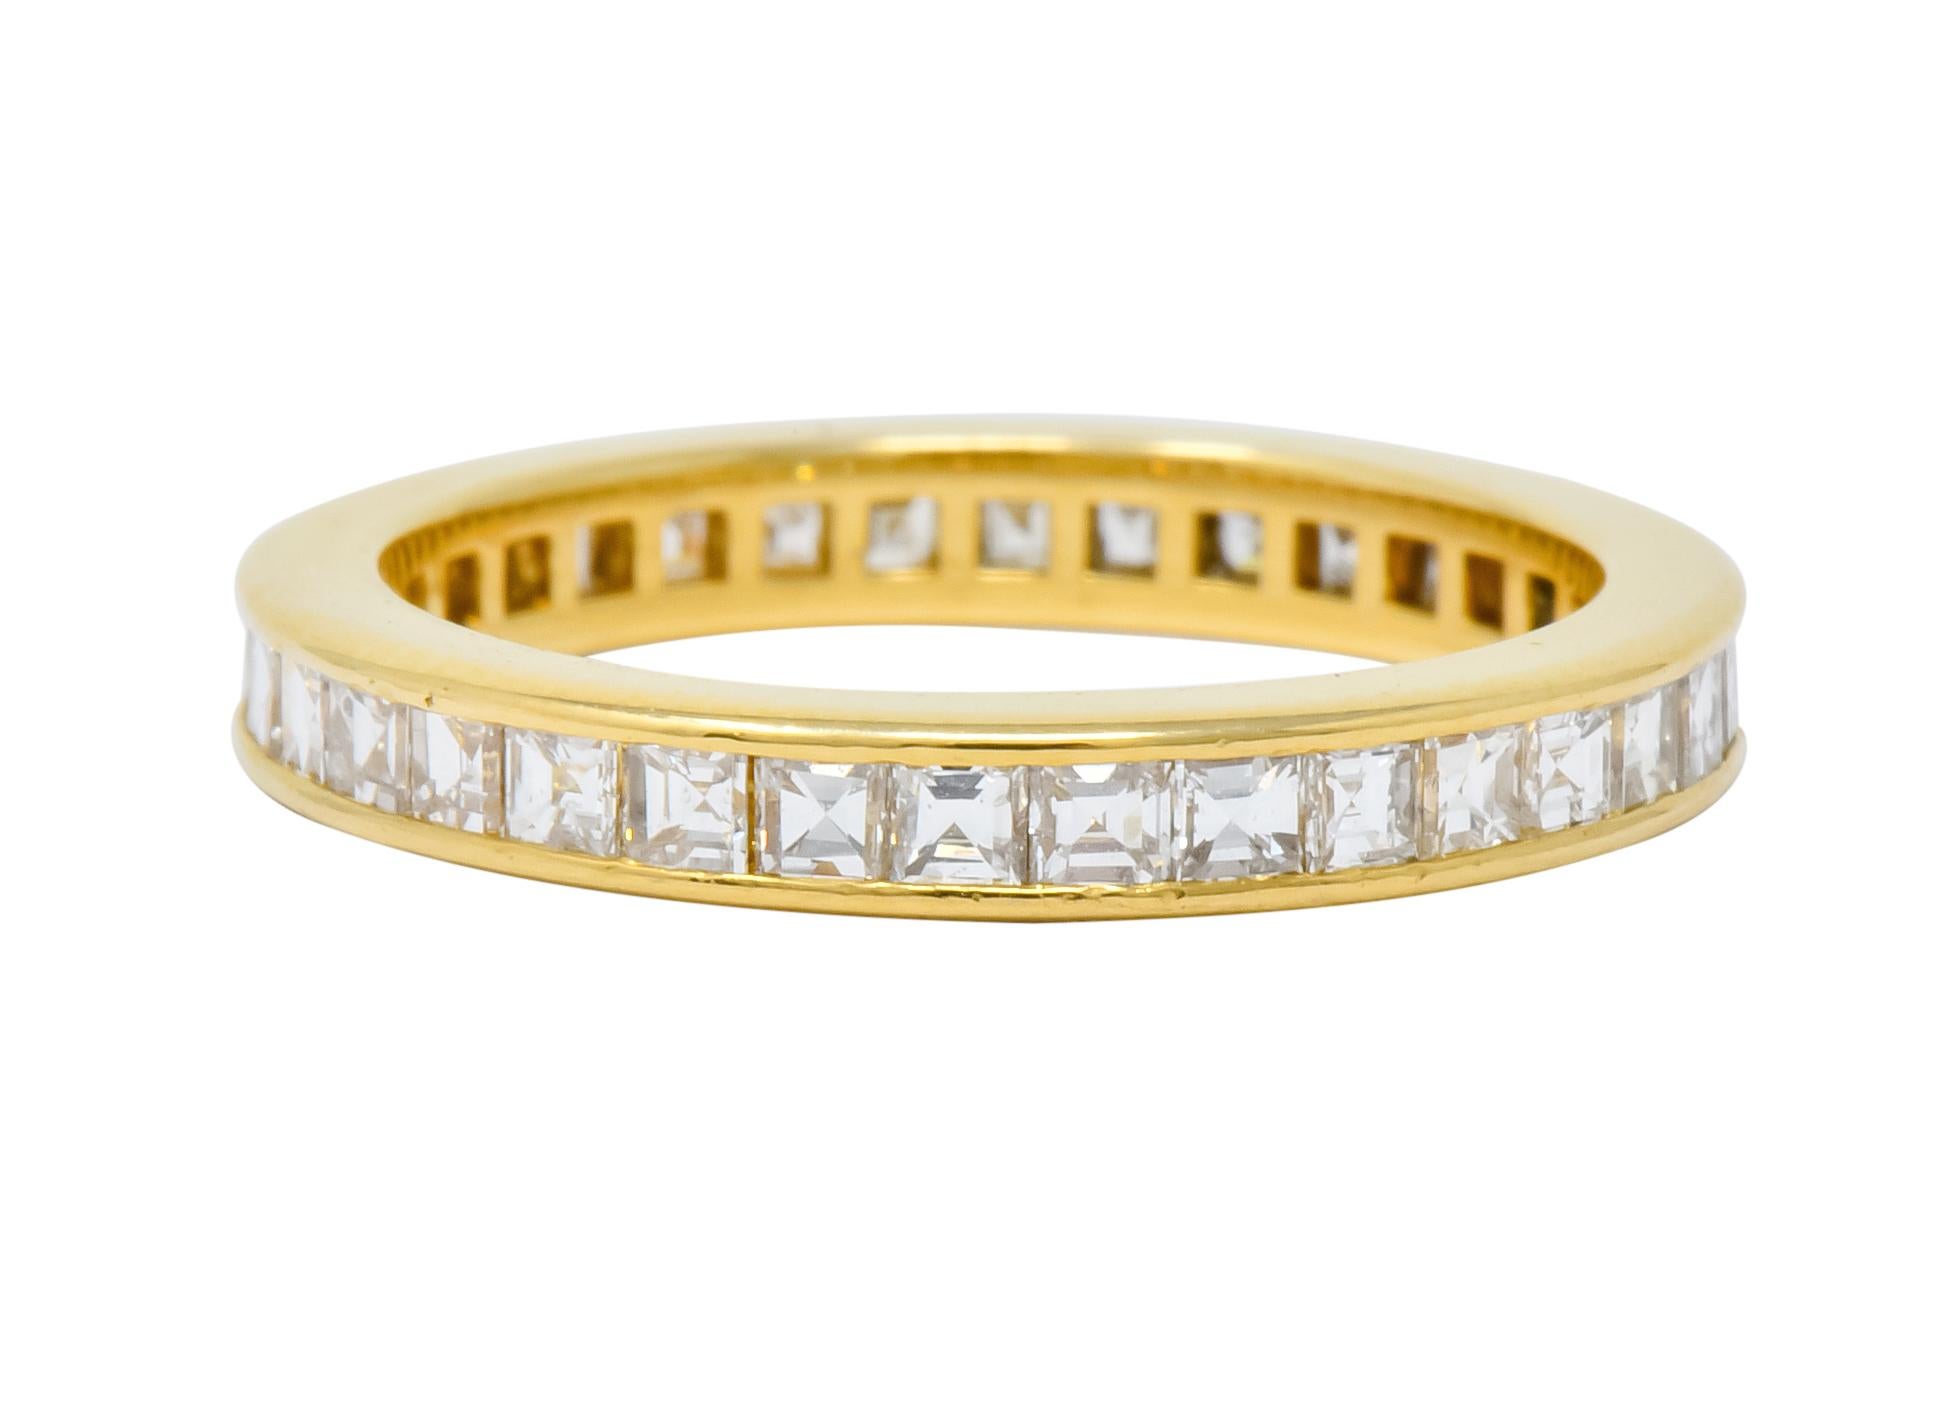 Eternity style band centering square step cut diamonds weighing 1.20 carats total, F/G color and VS clarity

Channel set fully around with high polished channel walls

Signed T & Co. for Tiffany & Co. and stamped 750 for 18 karat gold

Circa